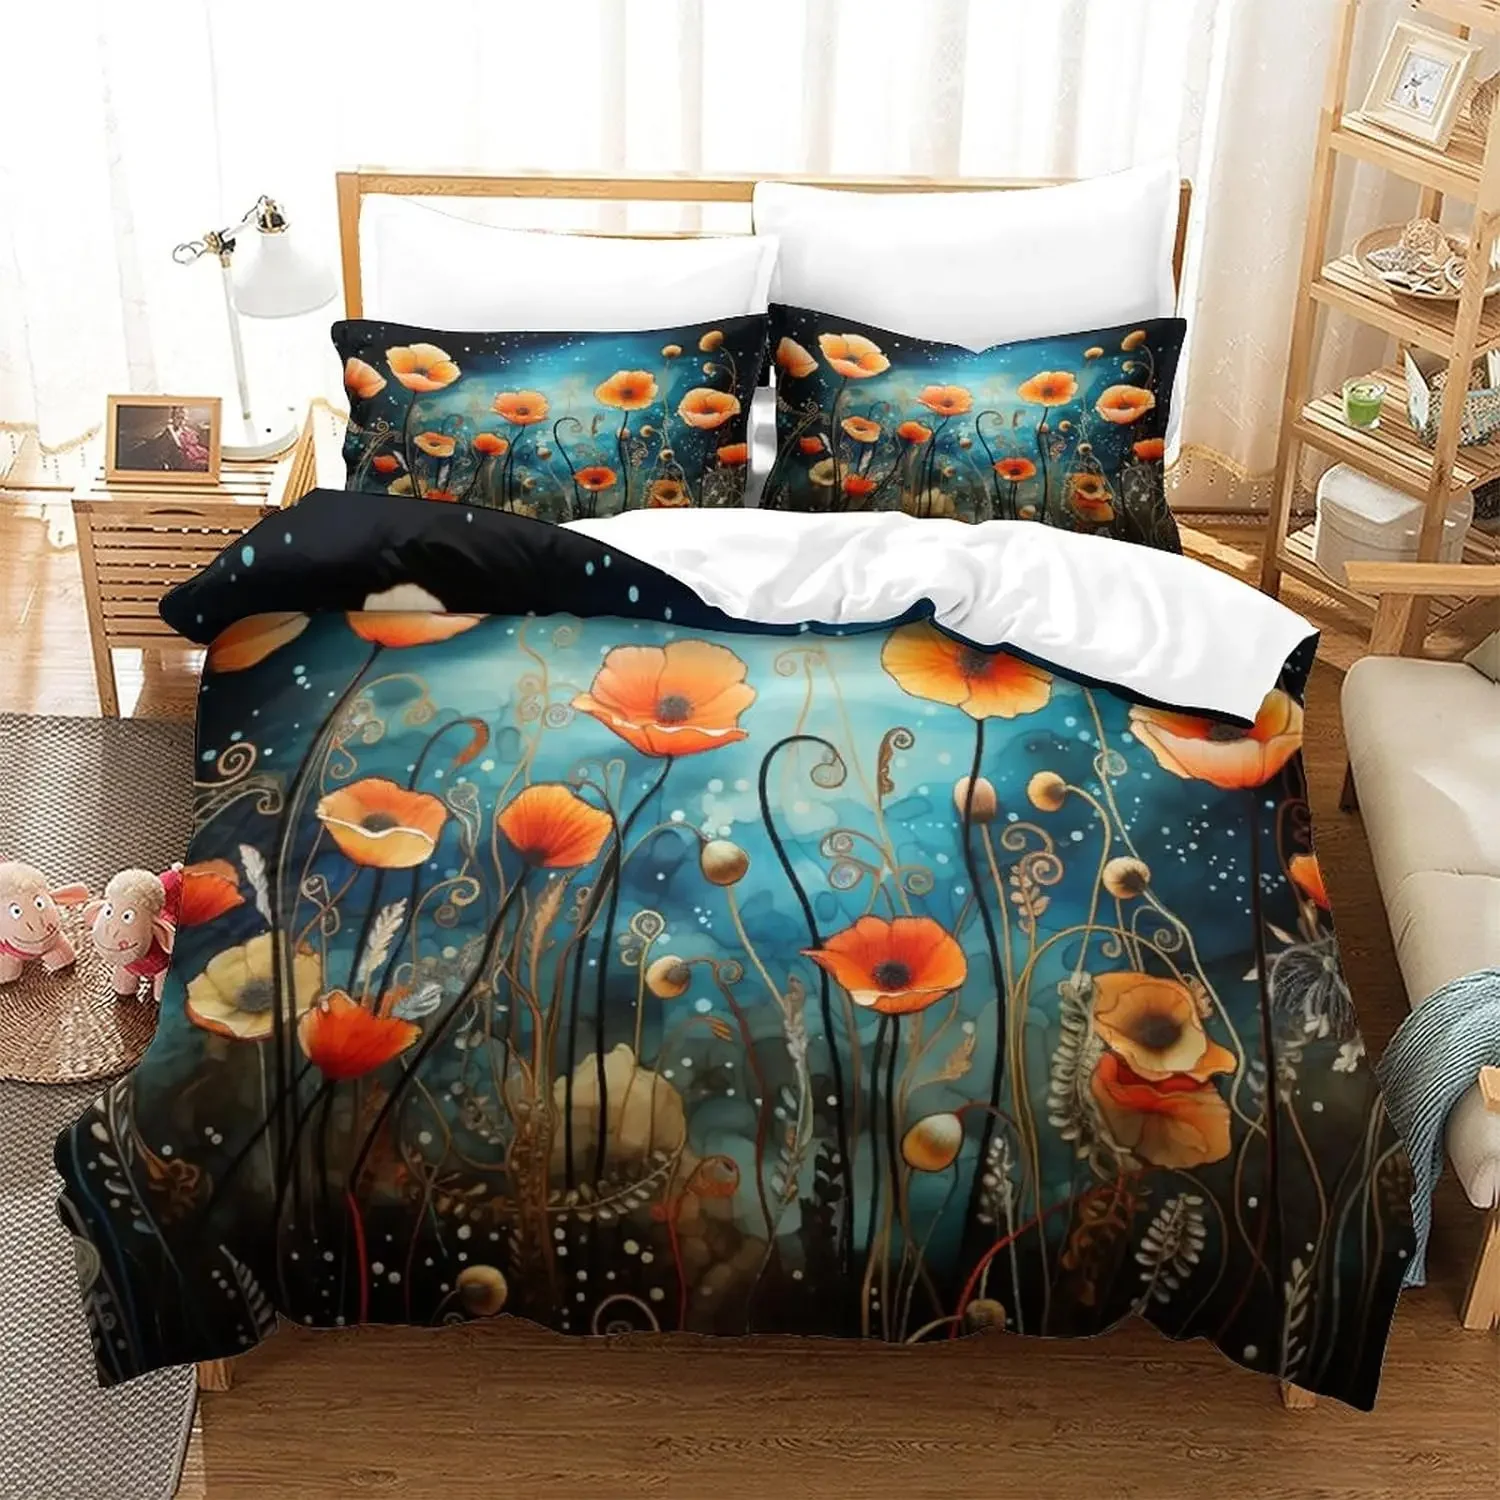 

Botanical Floral Duvet Cover King Leaves Flowers Bedding Set Microfiber Spring Blossom Quilt Cover Single Double For Teen Adults